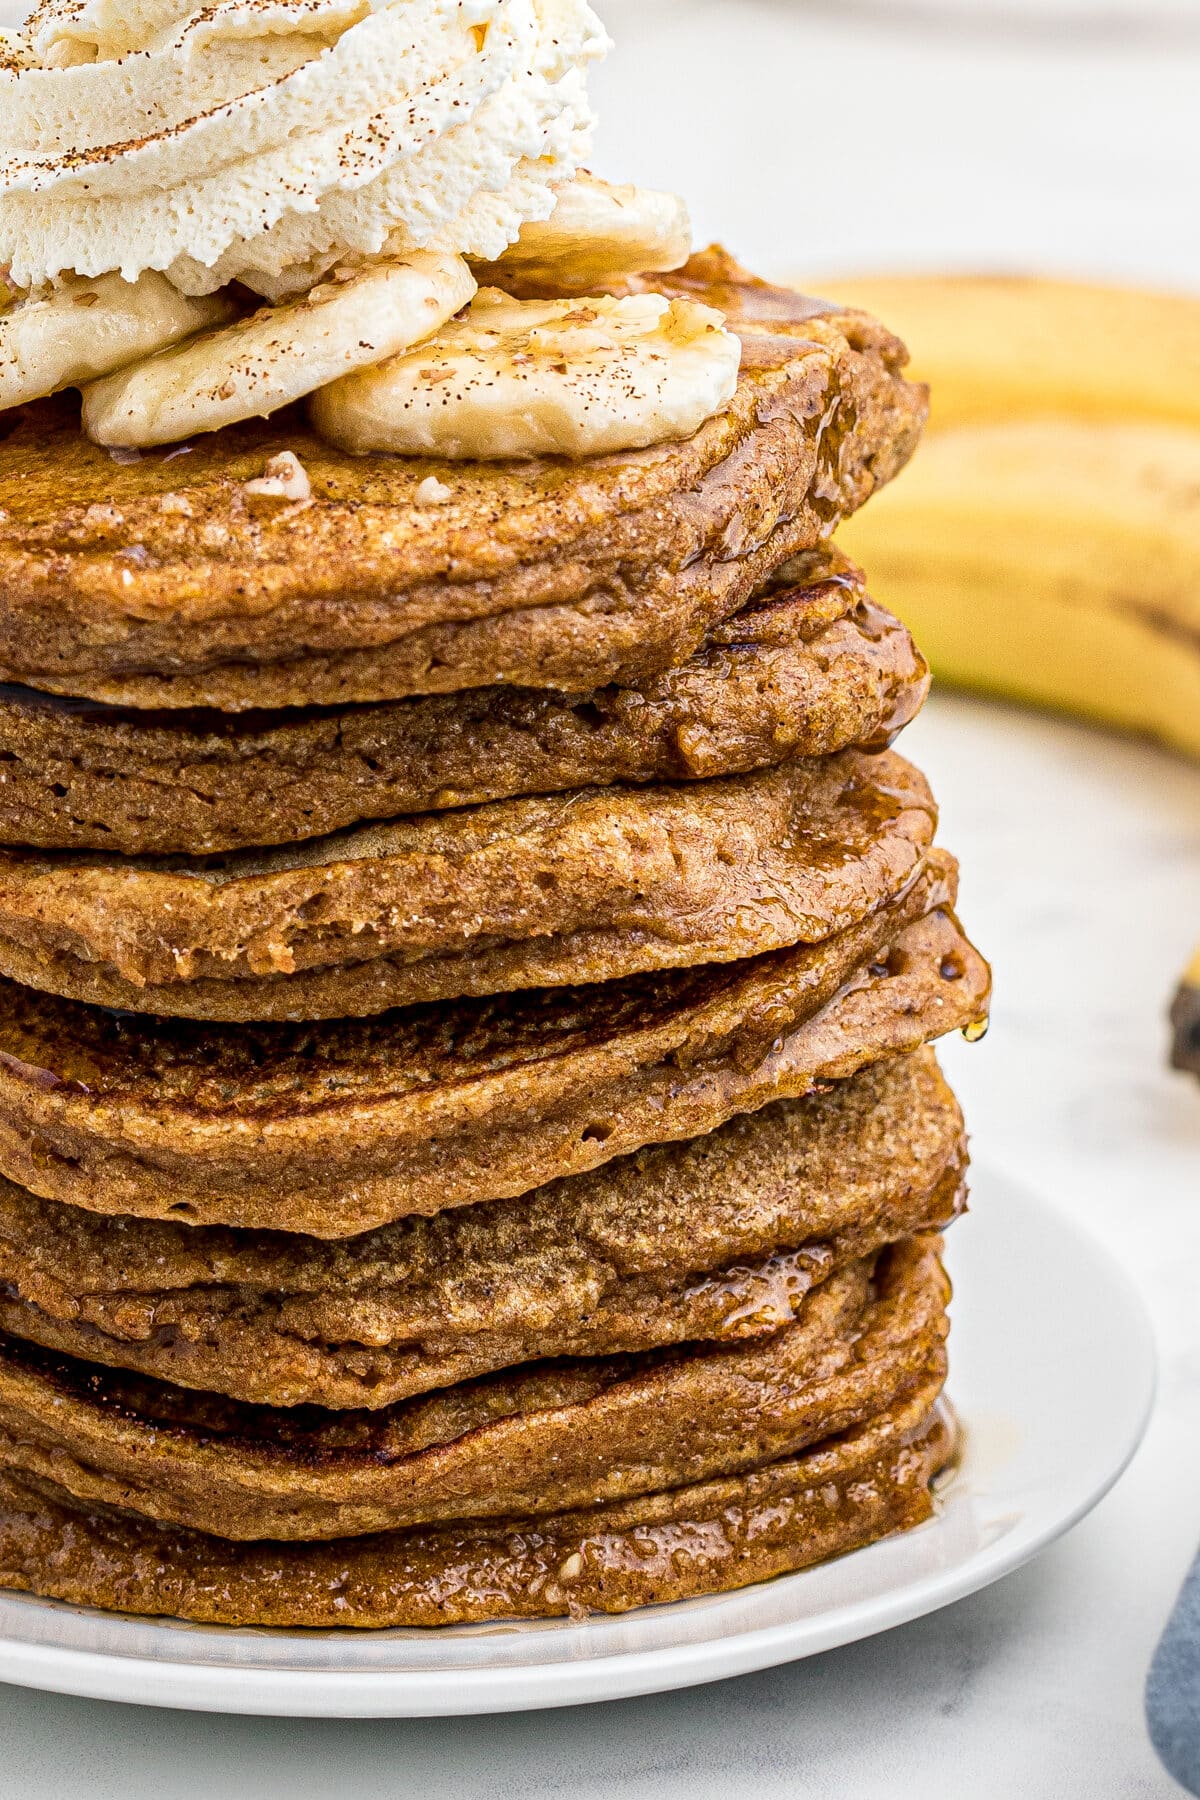 a close-up photo of sweet potato pancakes topped with bananas, whipped cream, cinnamon and chopped nuts